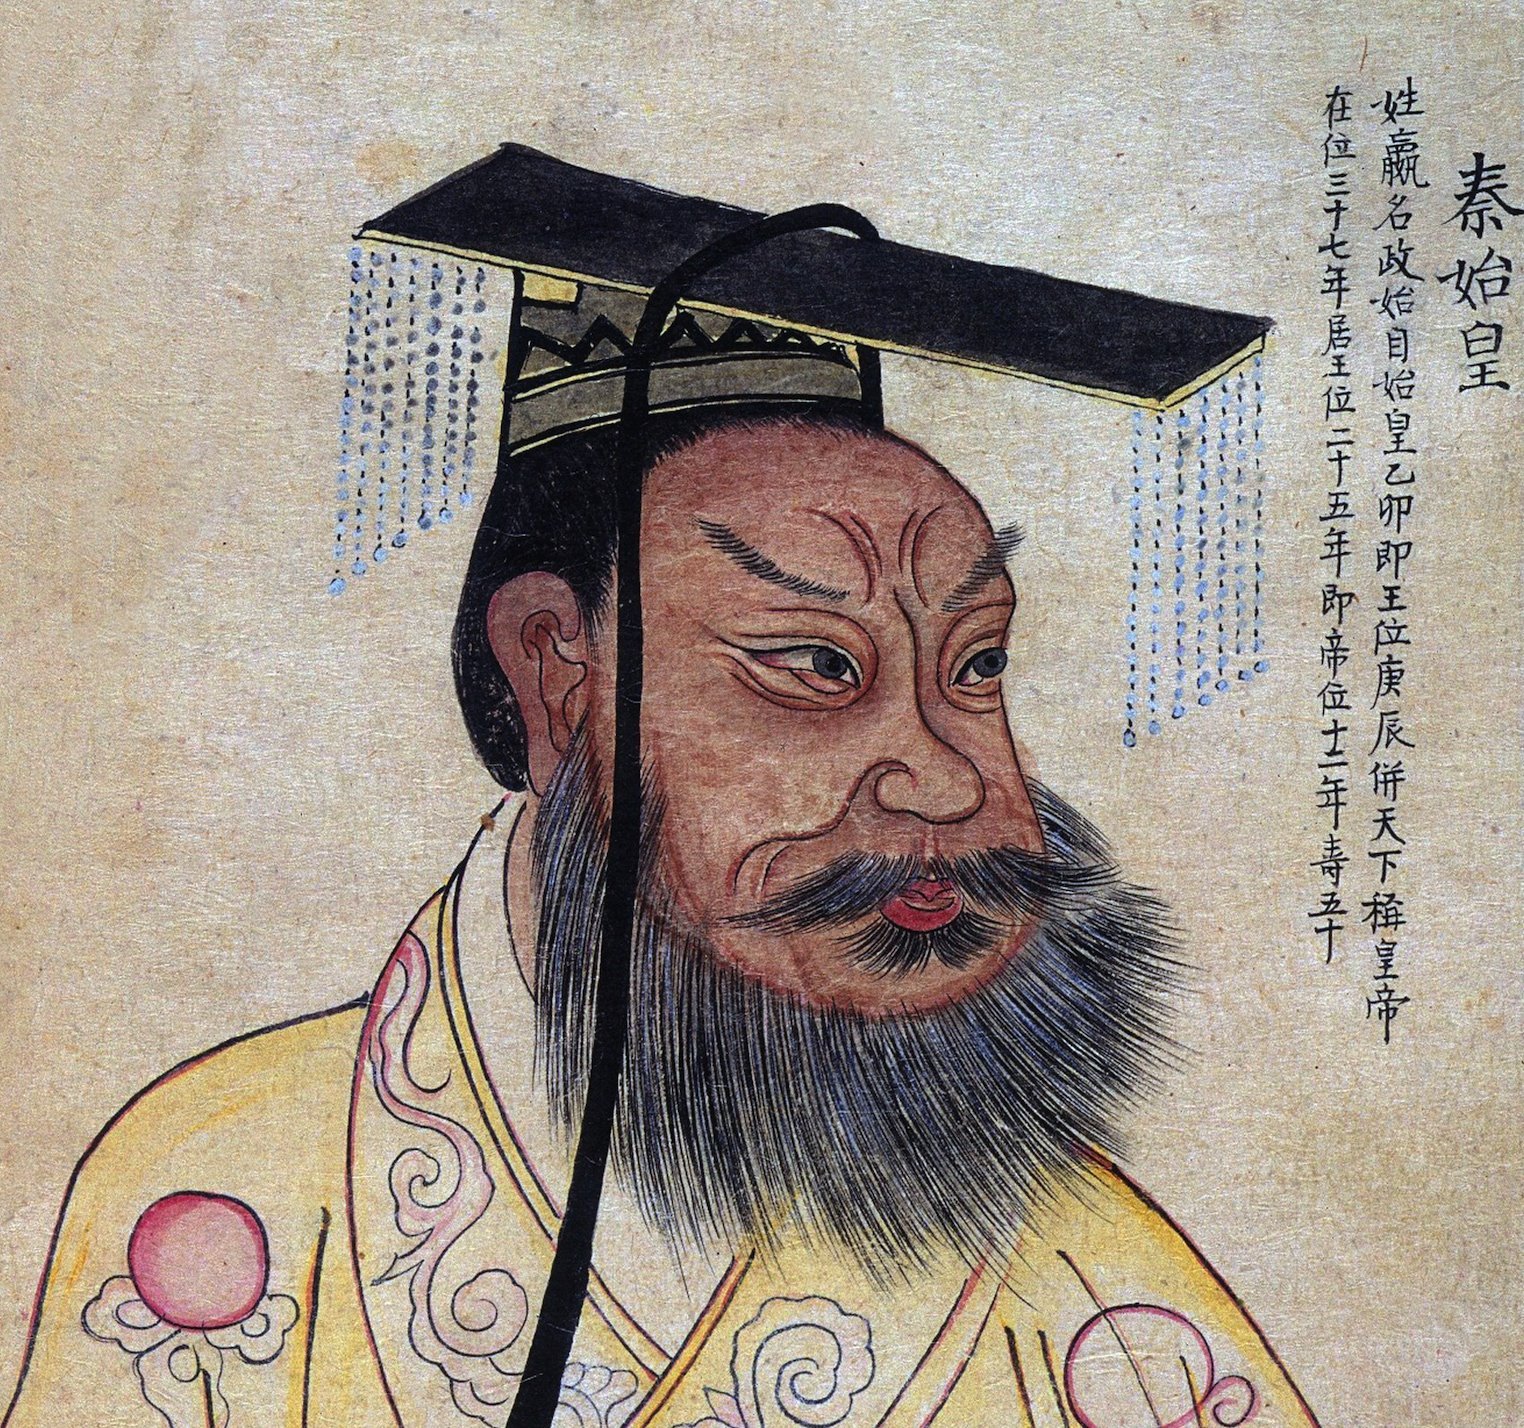 Drawing showing Qin Shi Huang (259 to 210 BC), personal name Ying Zheng, who was king of the Chinese State of Qin from 246 to 221 BCE during the Warring States Period. He became the first emperor of a unified China in 221 BCE, and ruled until his death in 210 BCE at the age of 49.